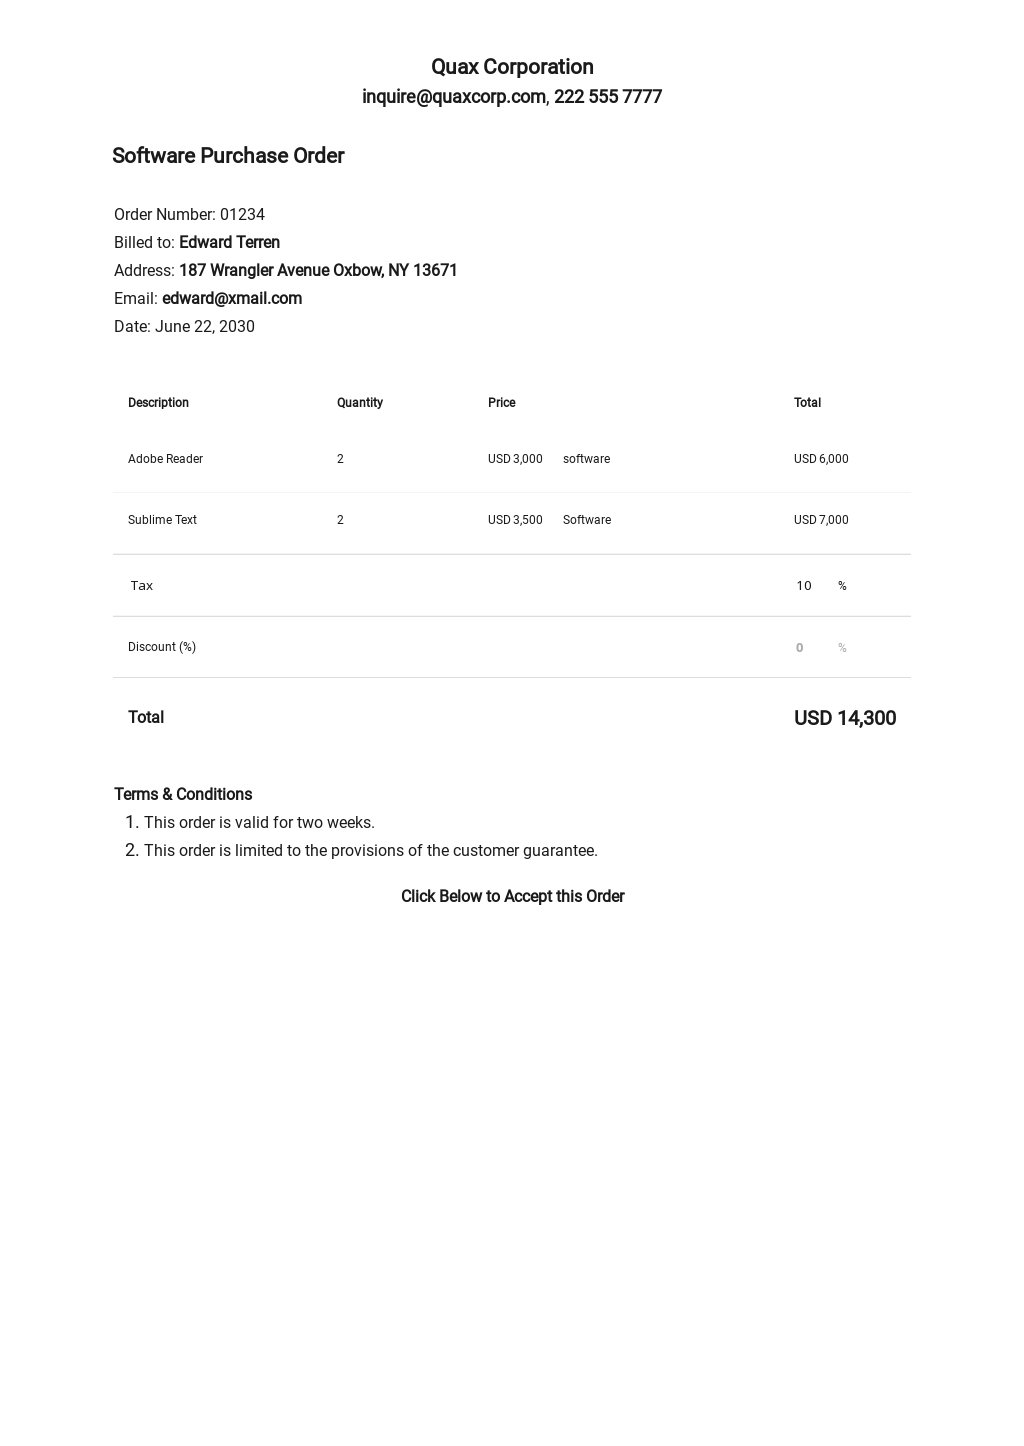 Free Simple Software Purchase Order Template.jpe